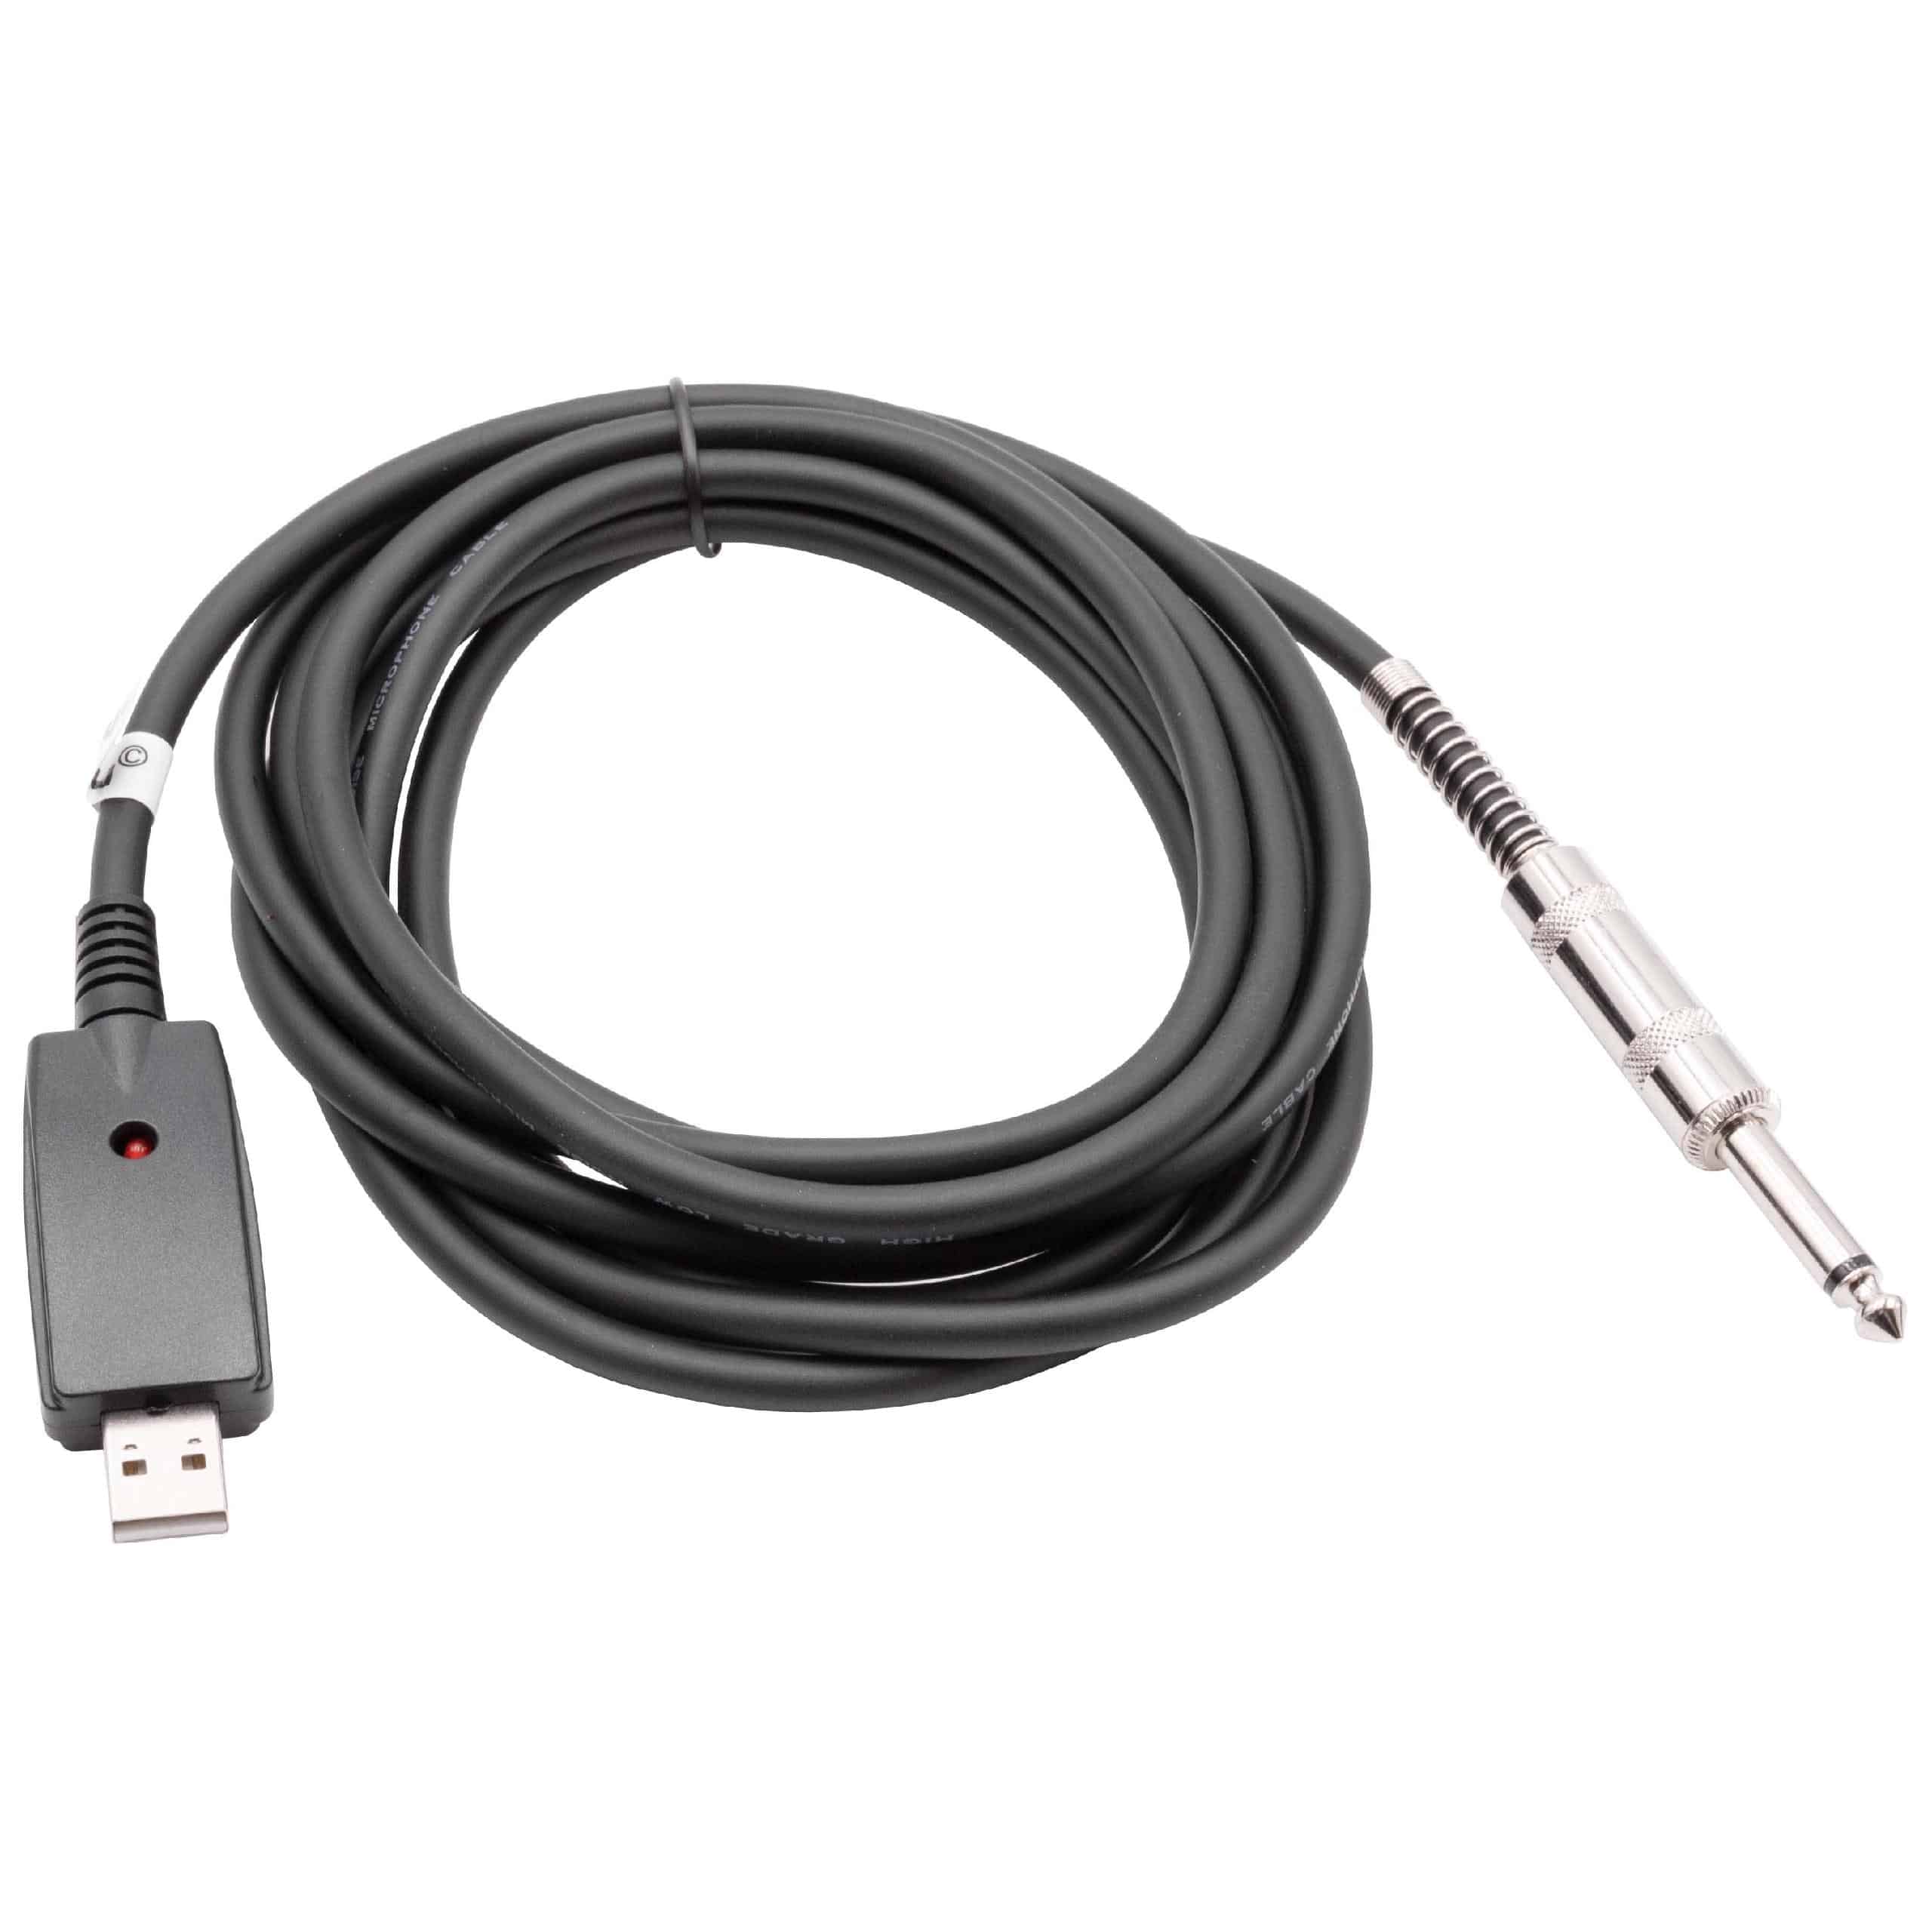 vhbw USB Cable Adapter USB 2.0 to 6.35mm Audio Jack - 2.8m Microphone Lead, Studio Audio Cord